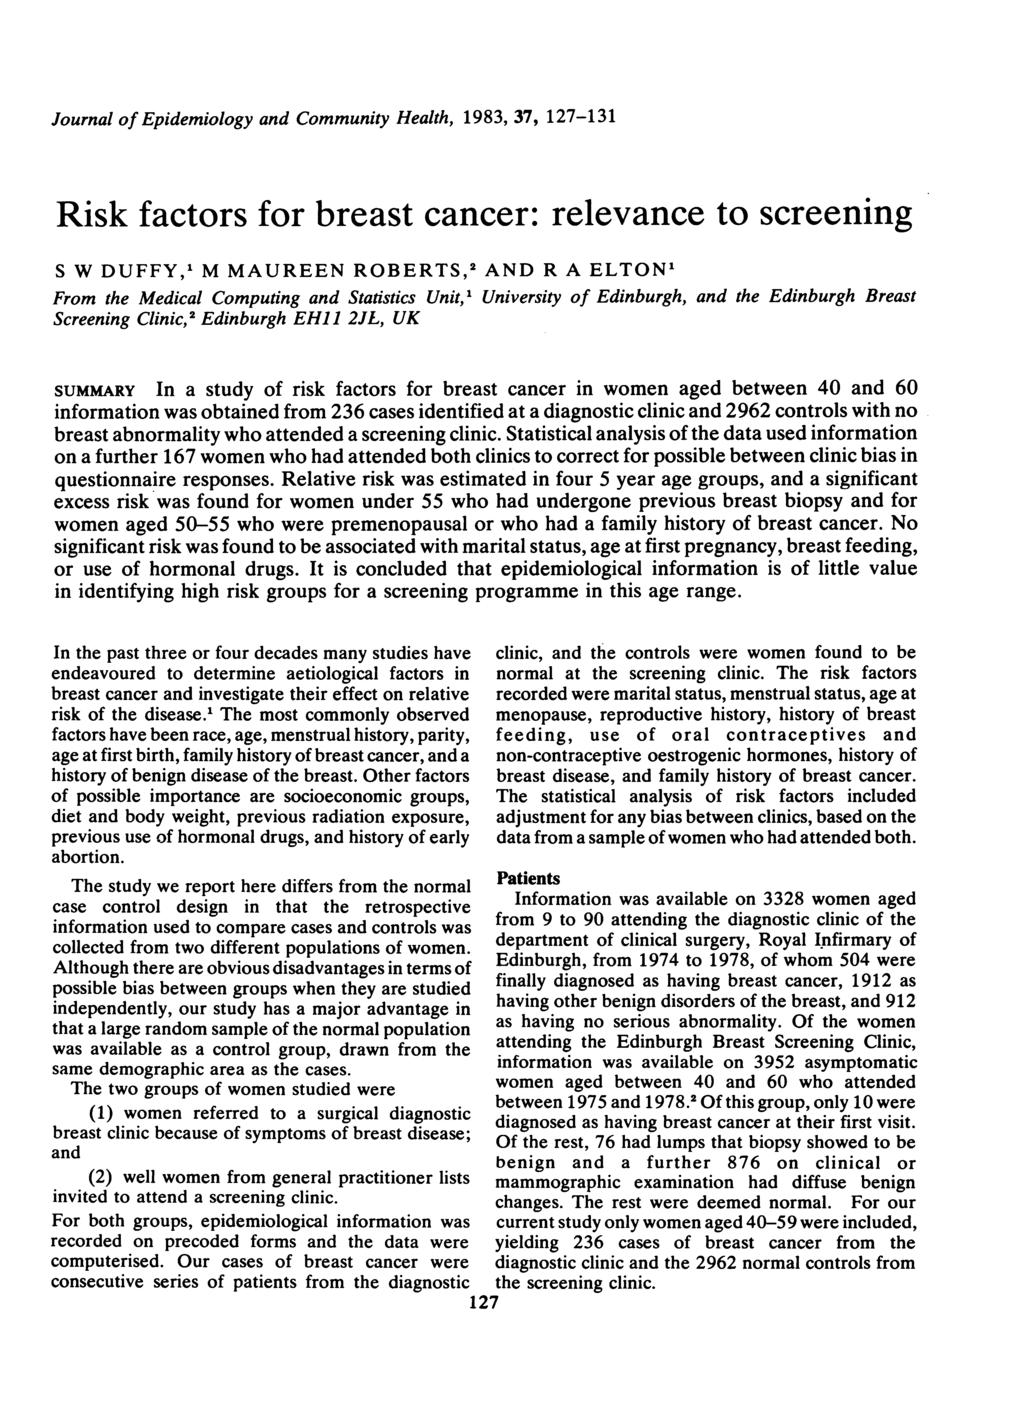 Journal of Epidemiology and Community Health, 1983, 37, 127-131 Risk factors for breast cancer: relevance to screening S W DUFFY,1 M MAUREEN ROBERTS,2 AND R A ELTON1 From the Medical Computing and